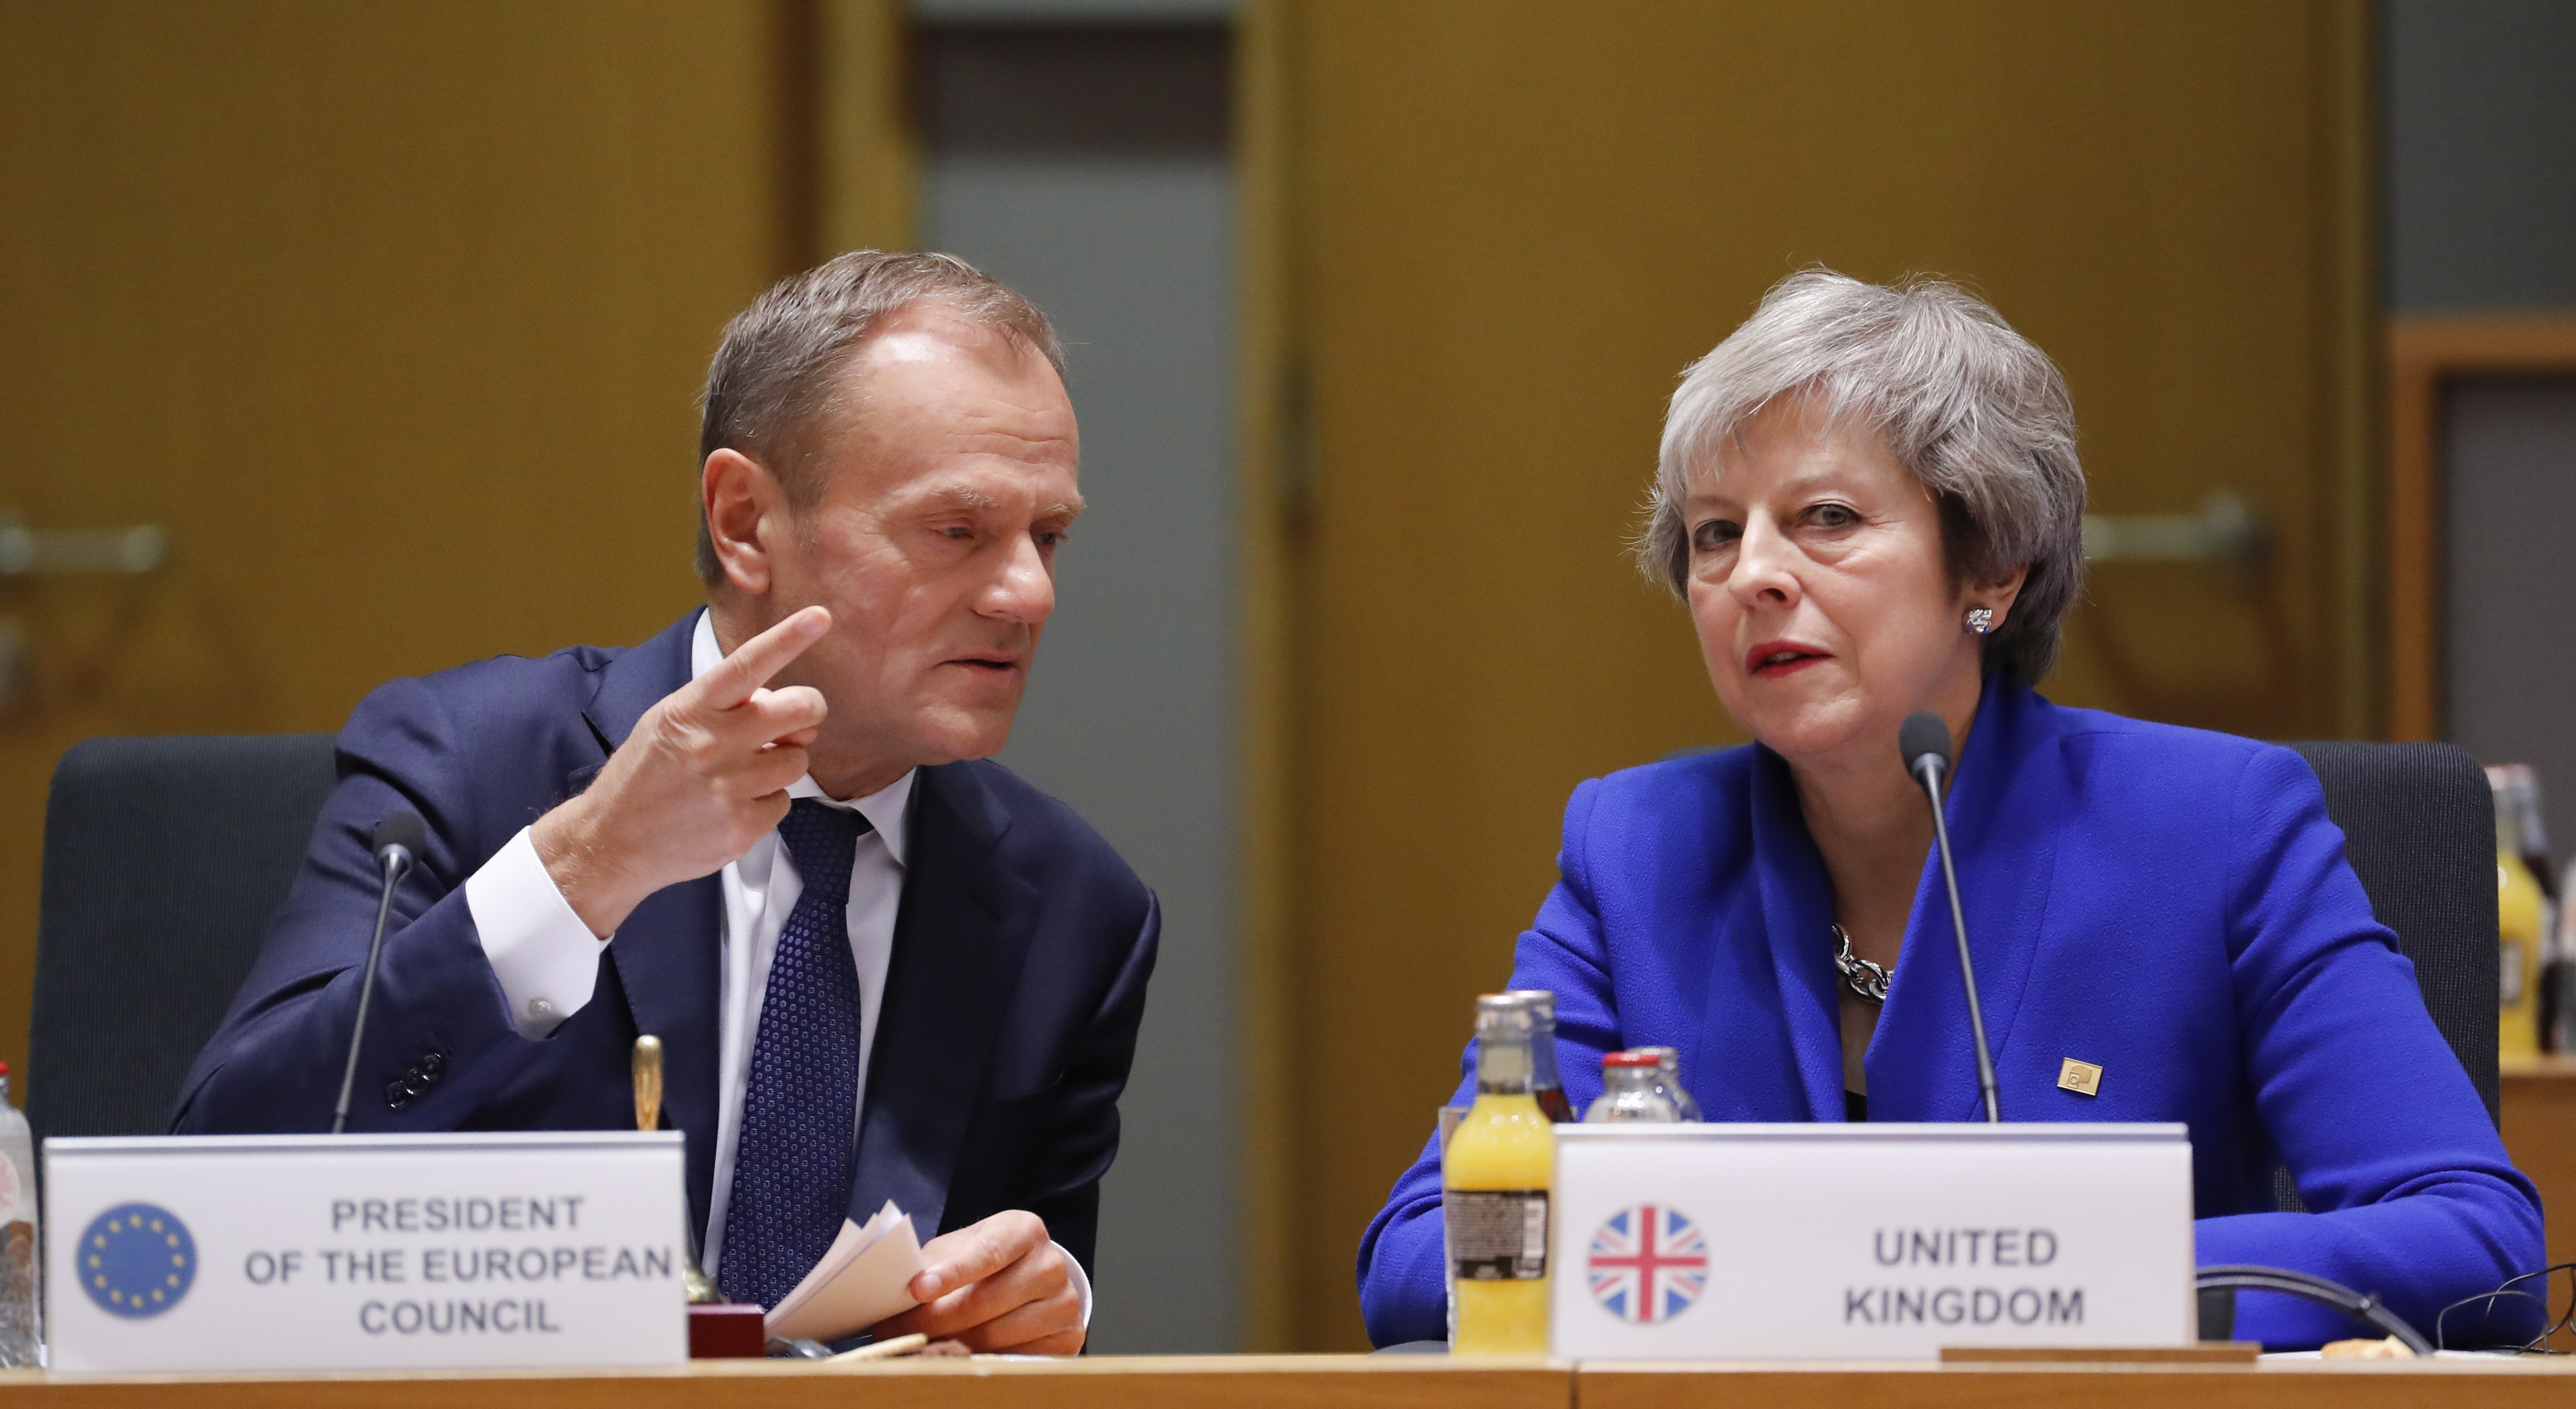 epa07188699 British Prime Minister Theresa May (R) and European Union Council President Donald Tusk meet during the European council in Brussels, Belgium, 25 November 2018. The leaders of the 27 remaining EU member countries (EU27) meet 'to endorse the draft Brexit withdrawal agreement and to approve the draft political declaration on future EU-UK relations' in a special meeting of the European Council on Britain leaving the EU under Article 50.  EPA/OLIVIER HOSLET / POOL